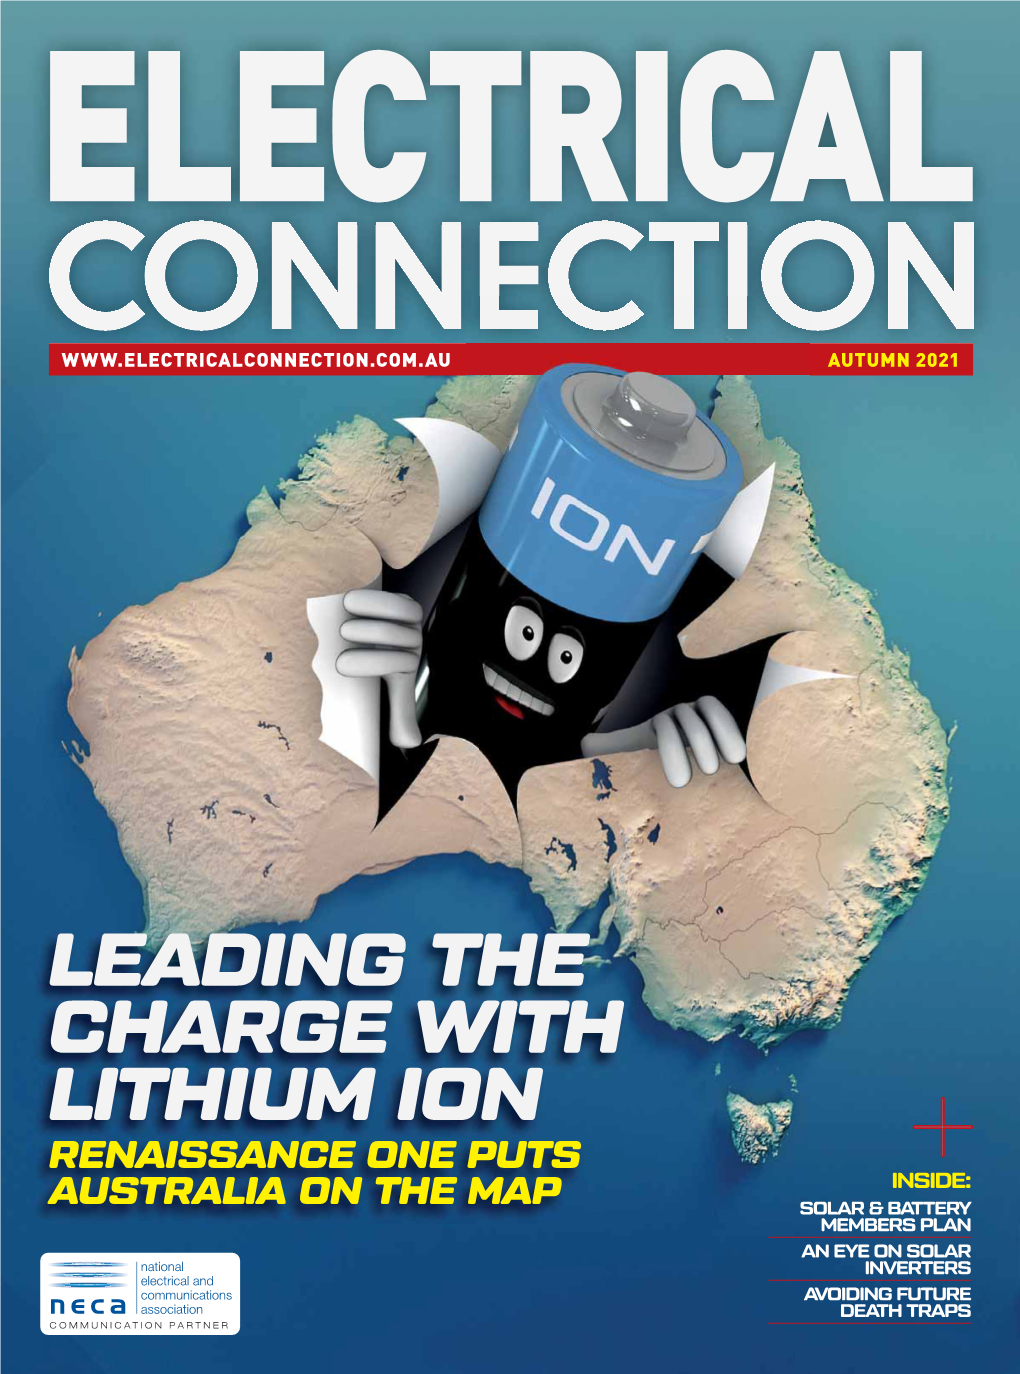 Leading the Charge with Lithium